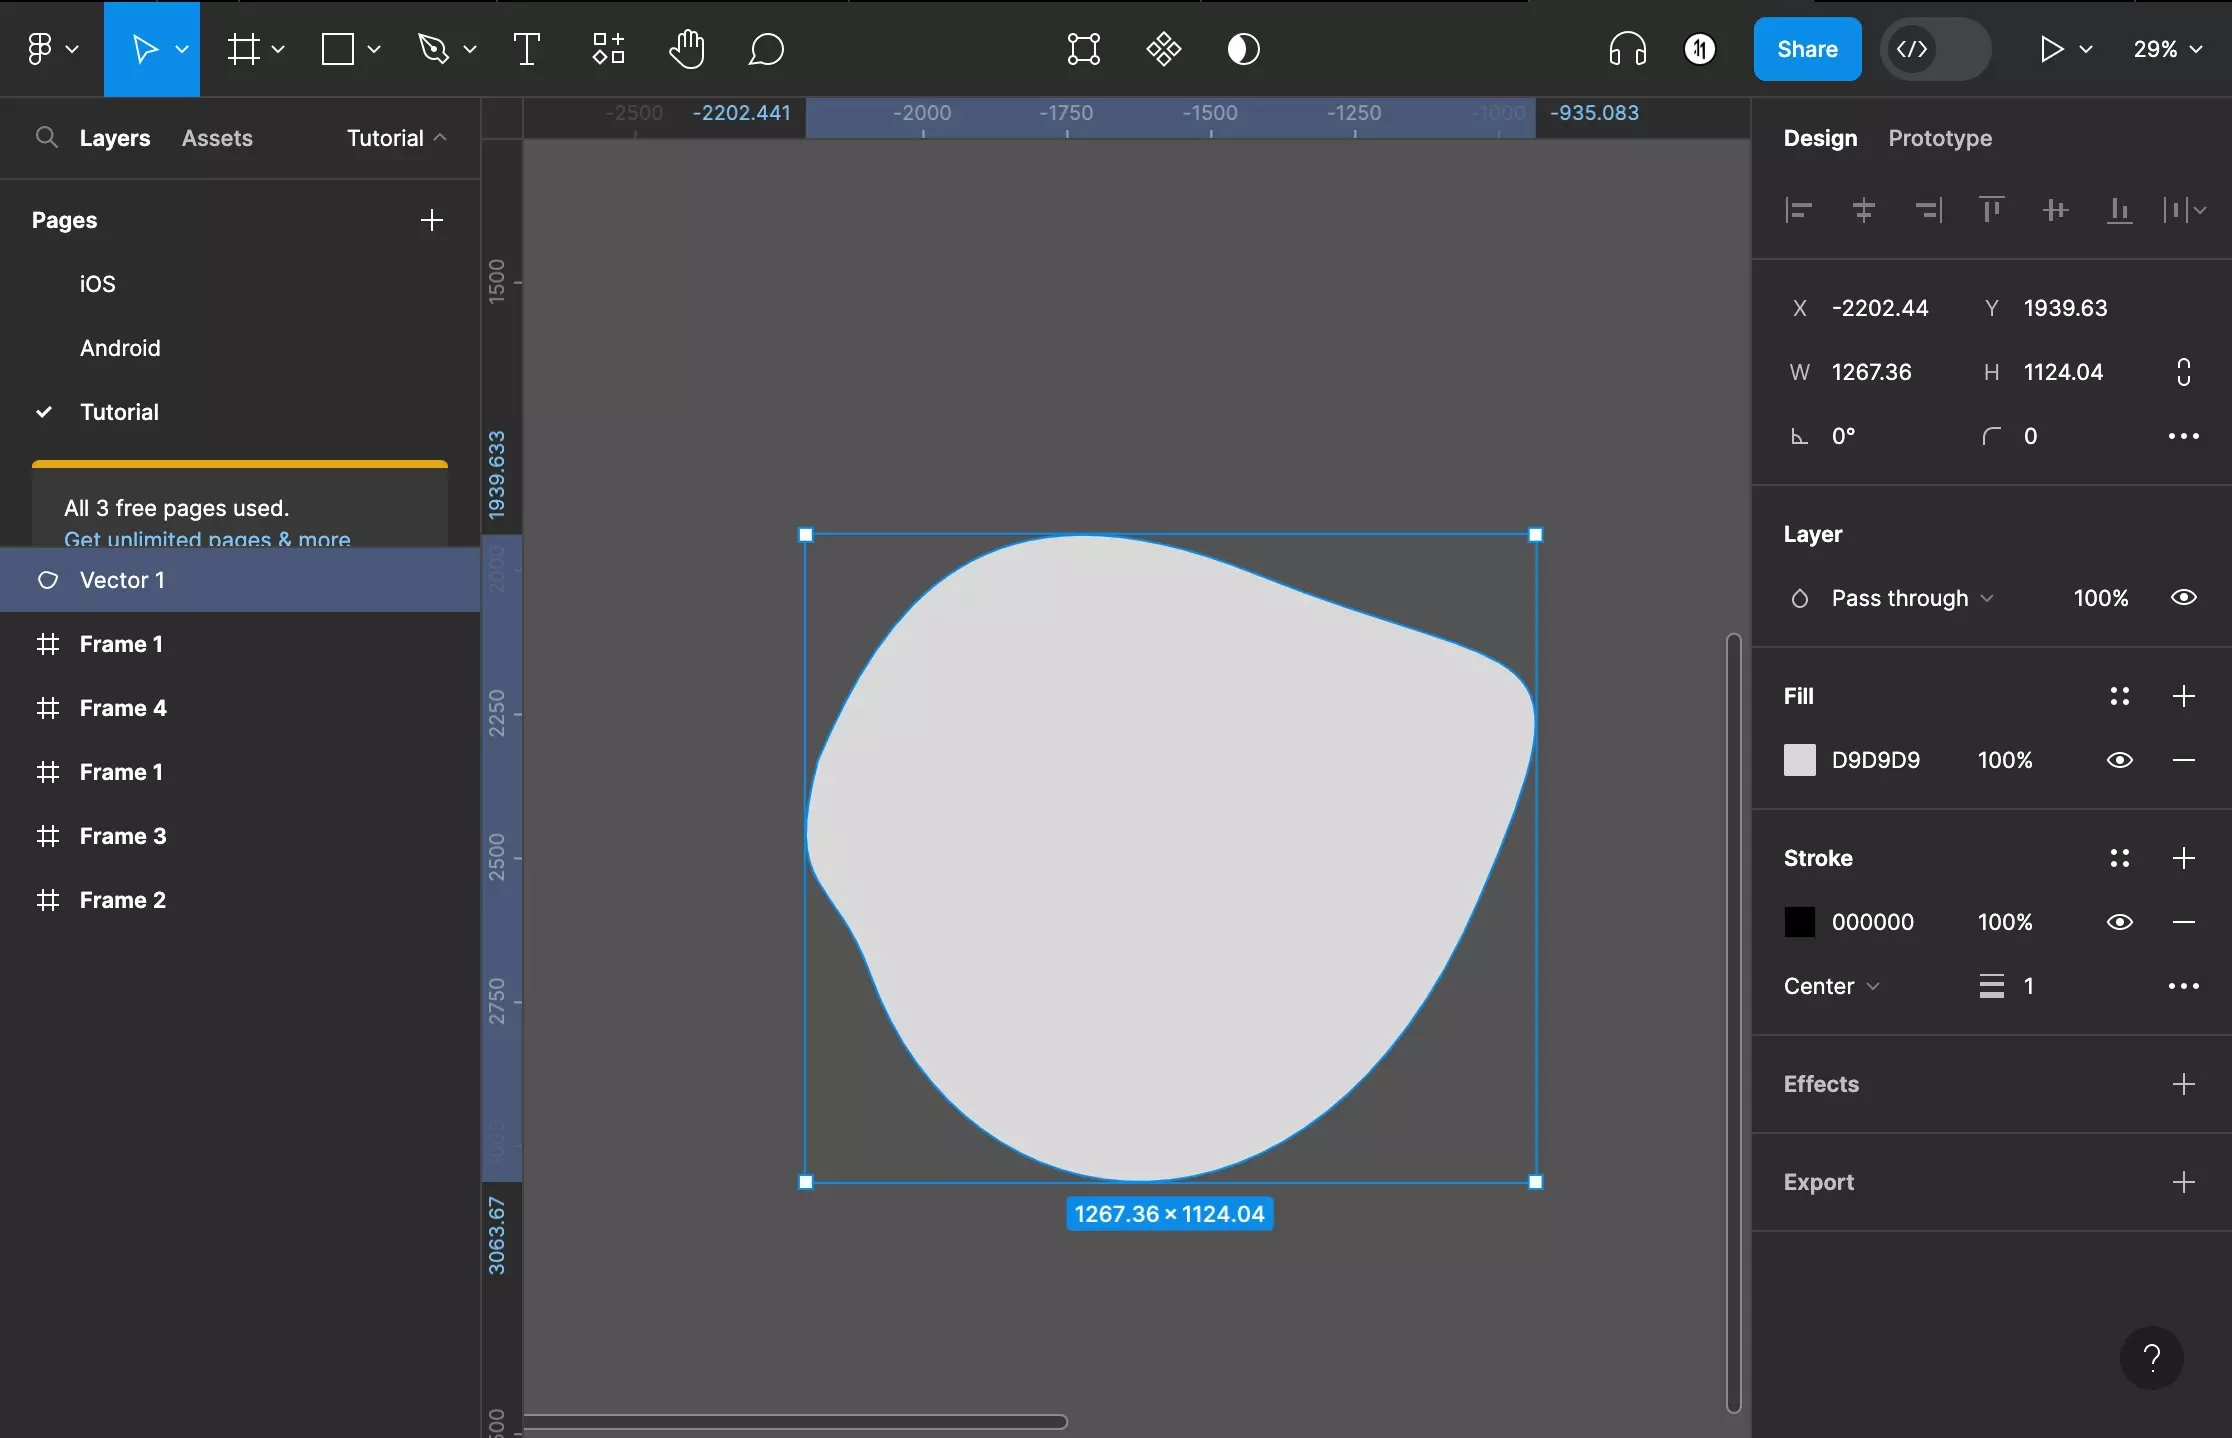 A screenshot of Figma showing a shape drawn using the pen tool. It has been filled in with the paint bucket and is currently selected. To re-enter the pen tool mode for a shape, double click it after selecting it.